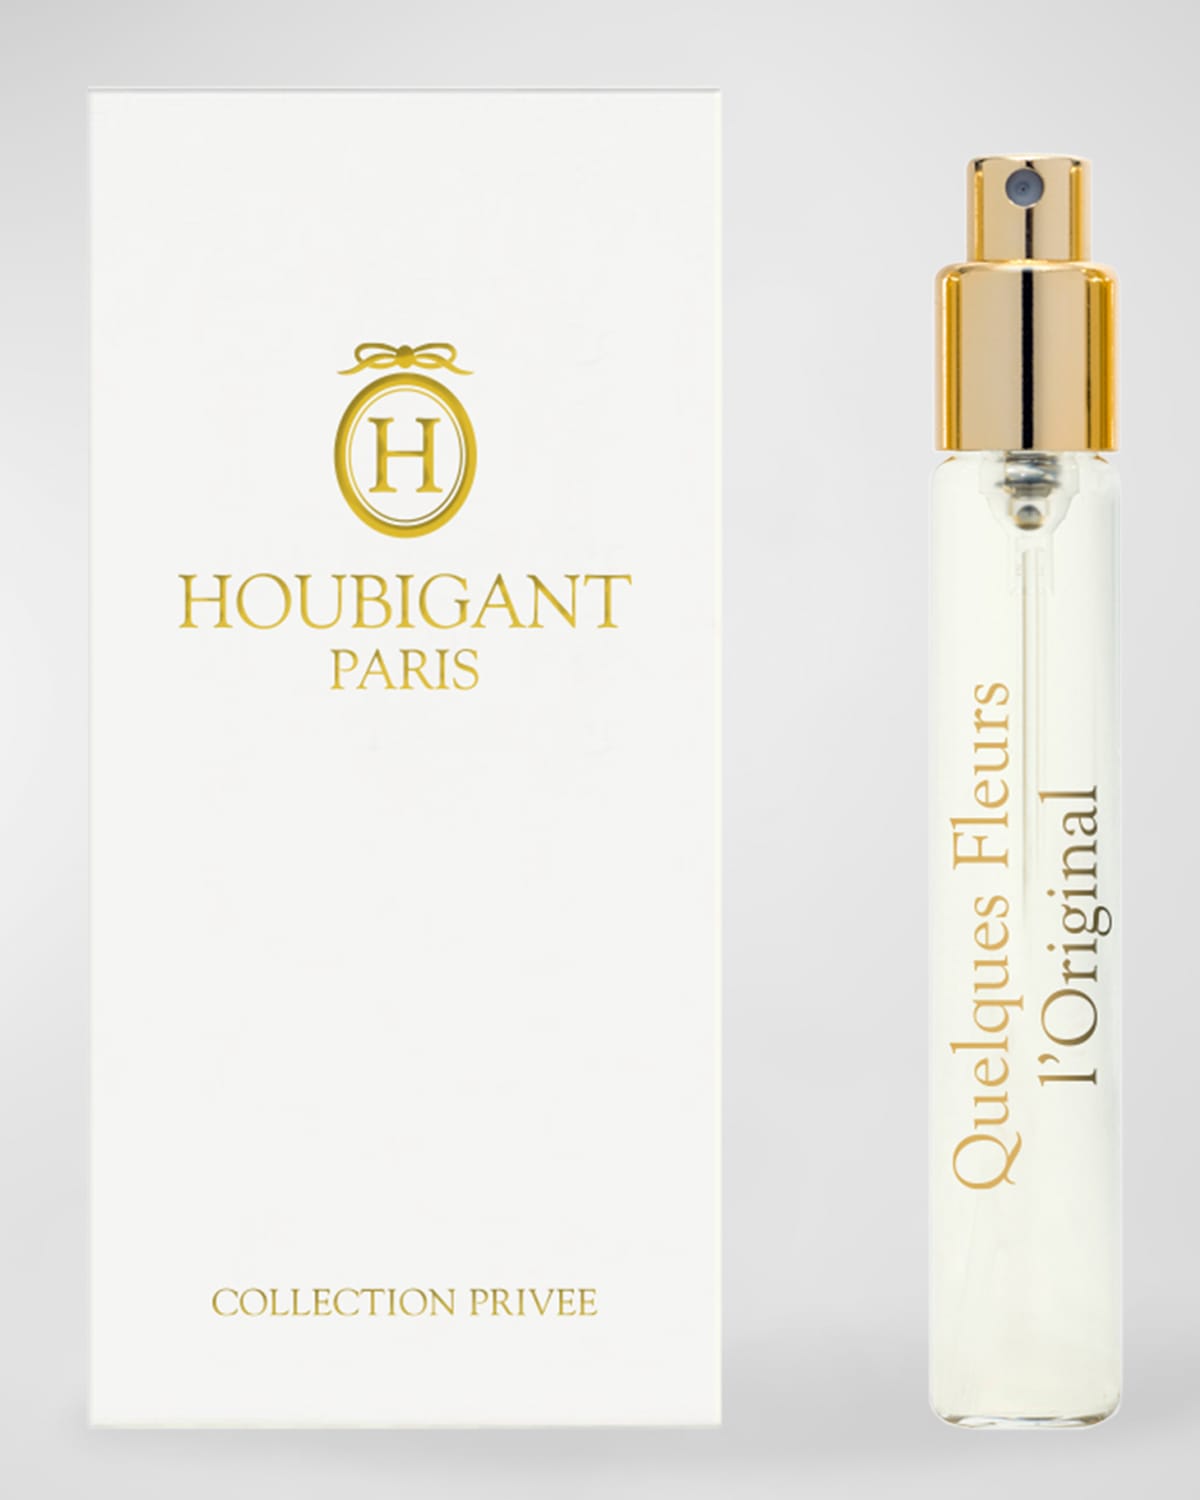 Quelques Fleurs Extrait Travel Spray, 8 mL - Yours with any $285 Privee Collection Fragrance Purchase